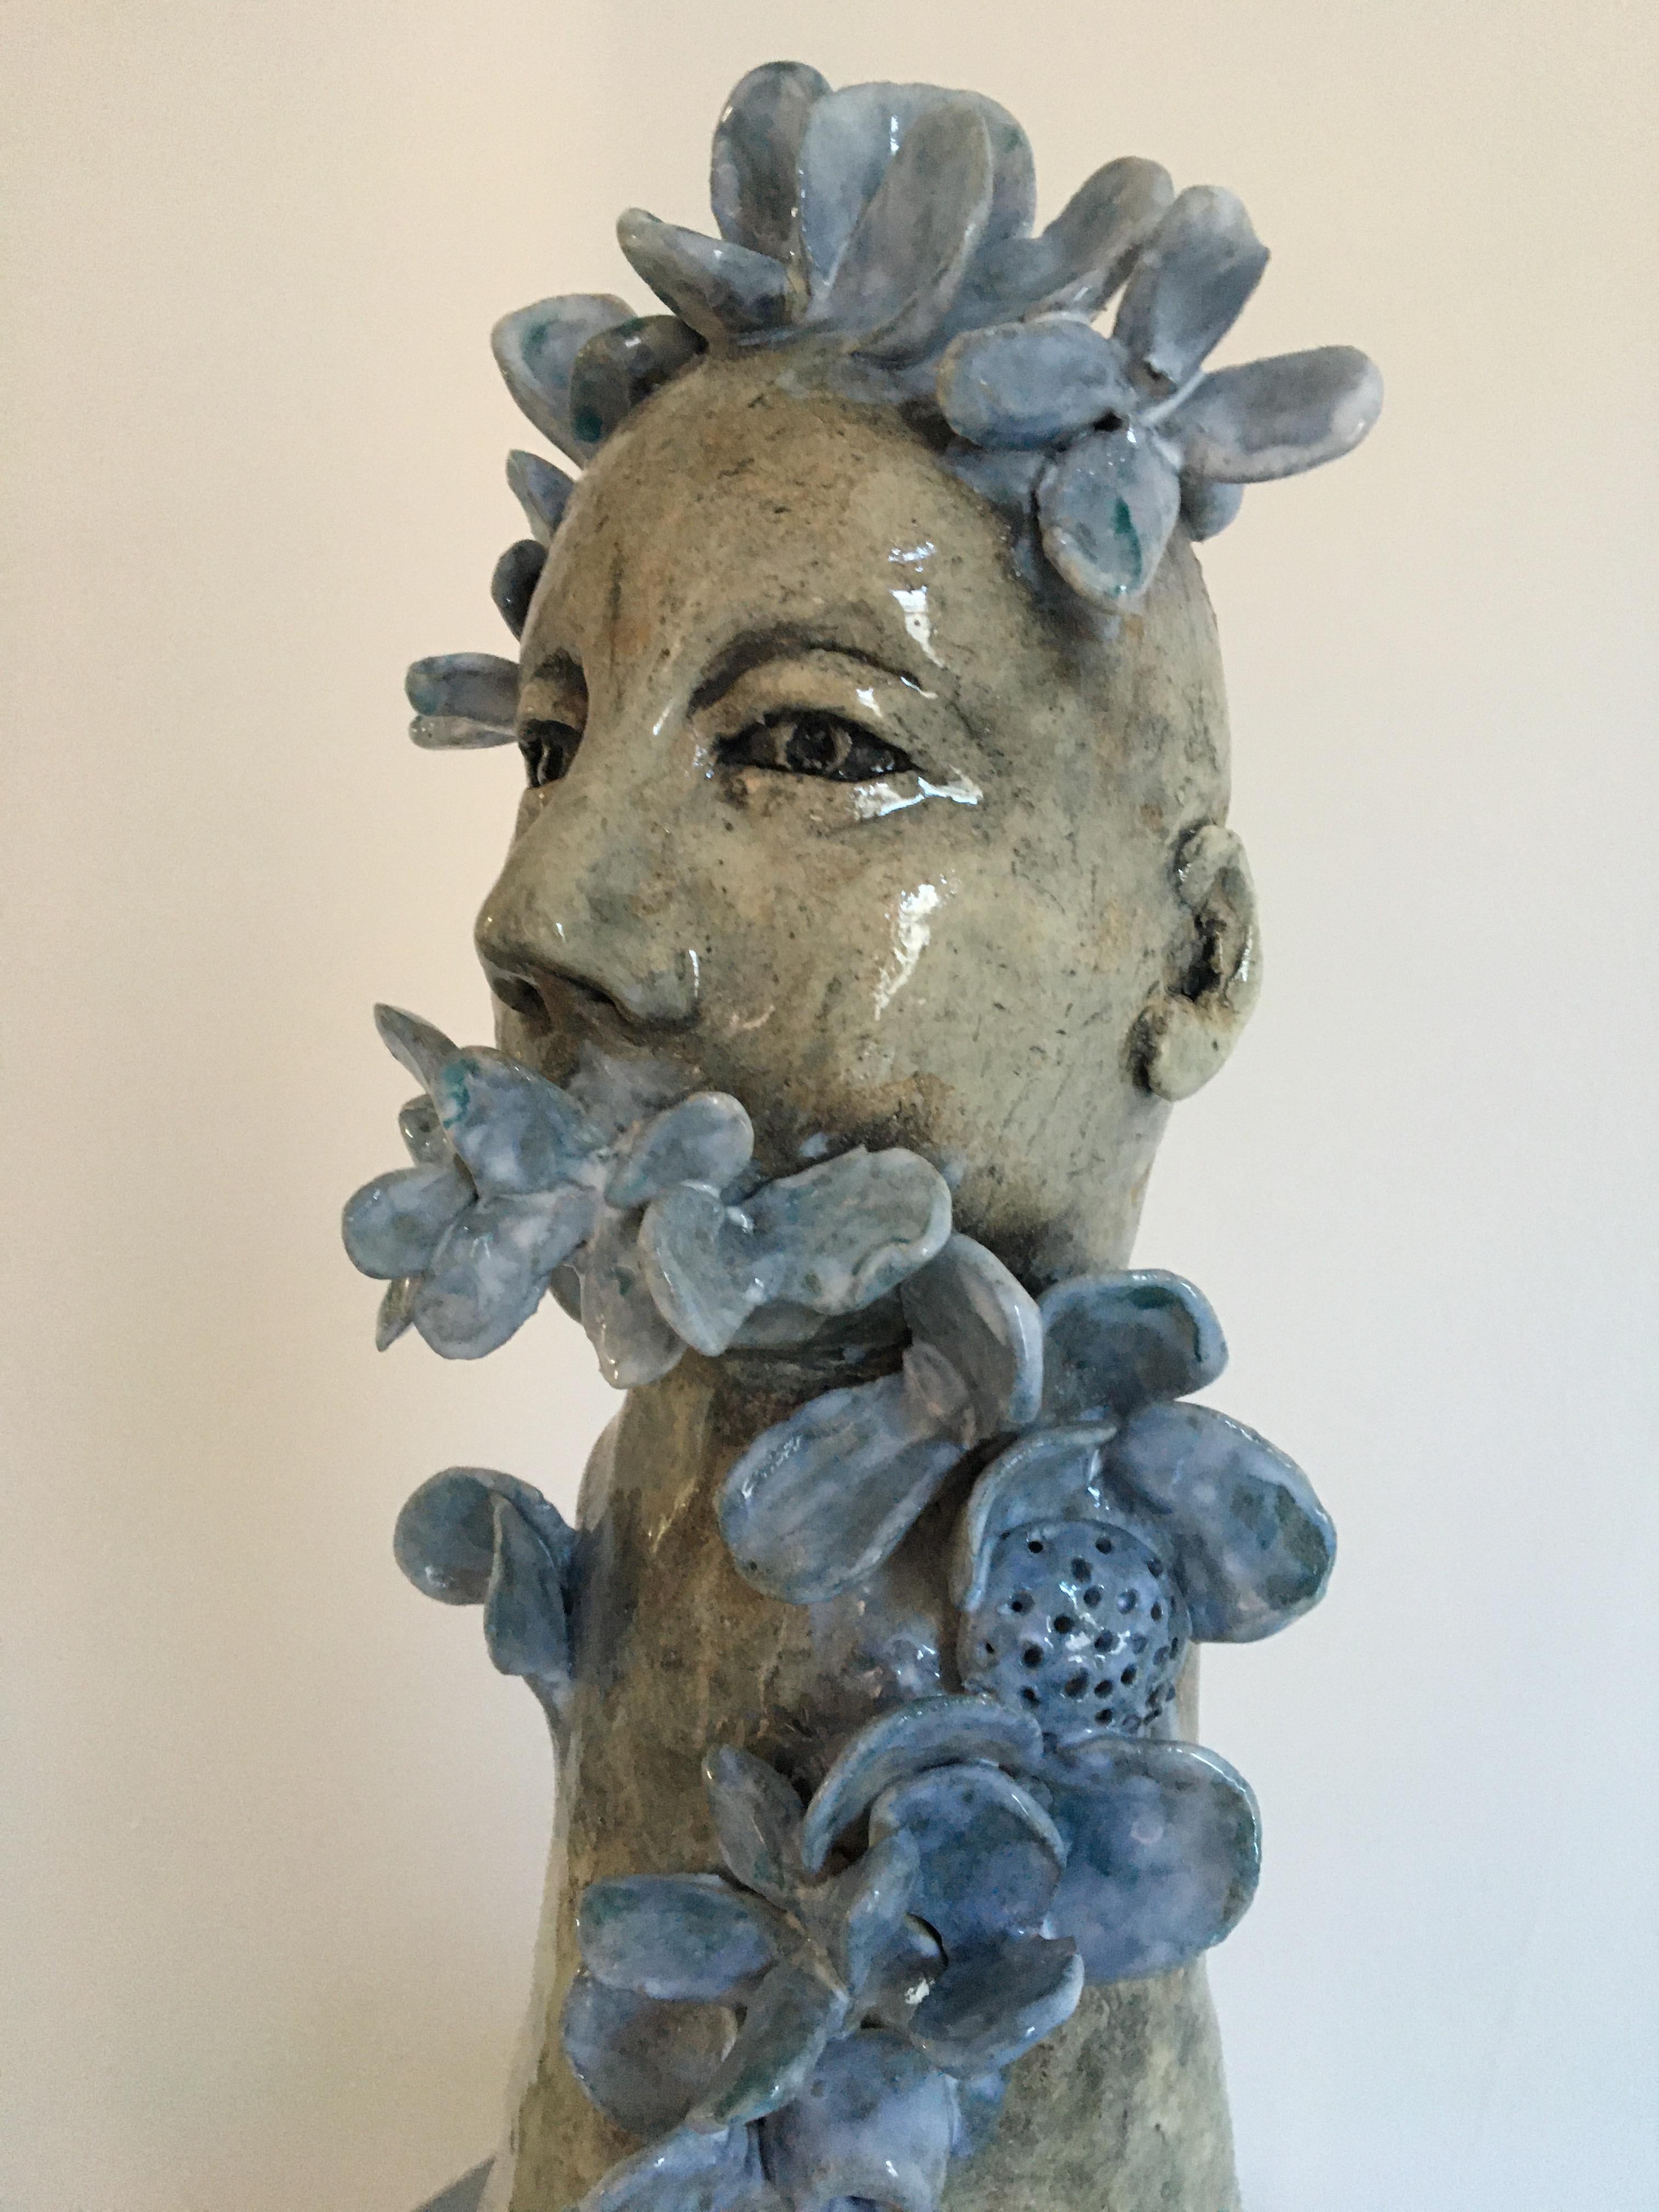 Ceramic figure: 'Let go of expectations and experience the subtle and unbounded' - Sculpture by Ashley Benton